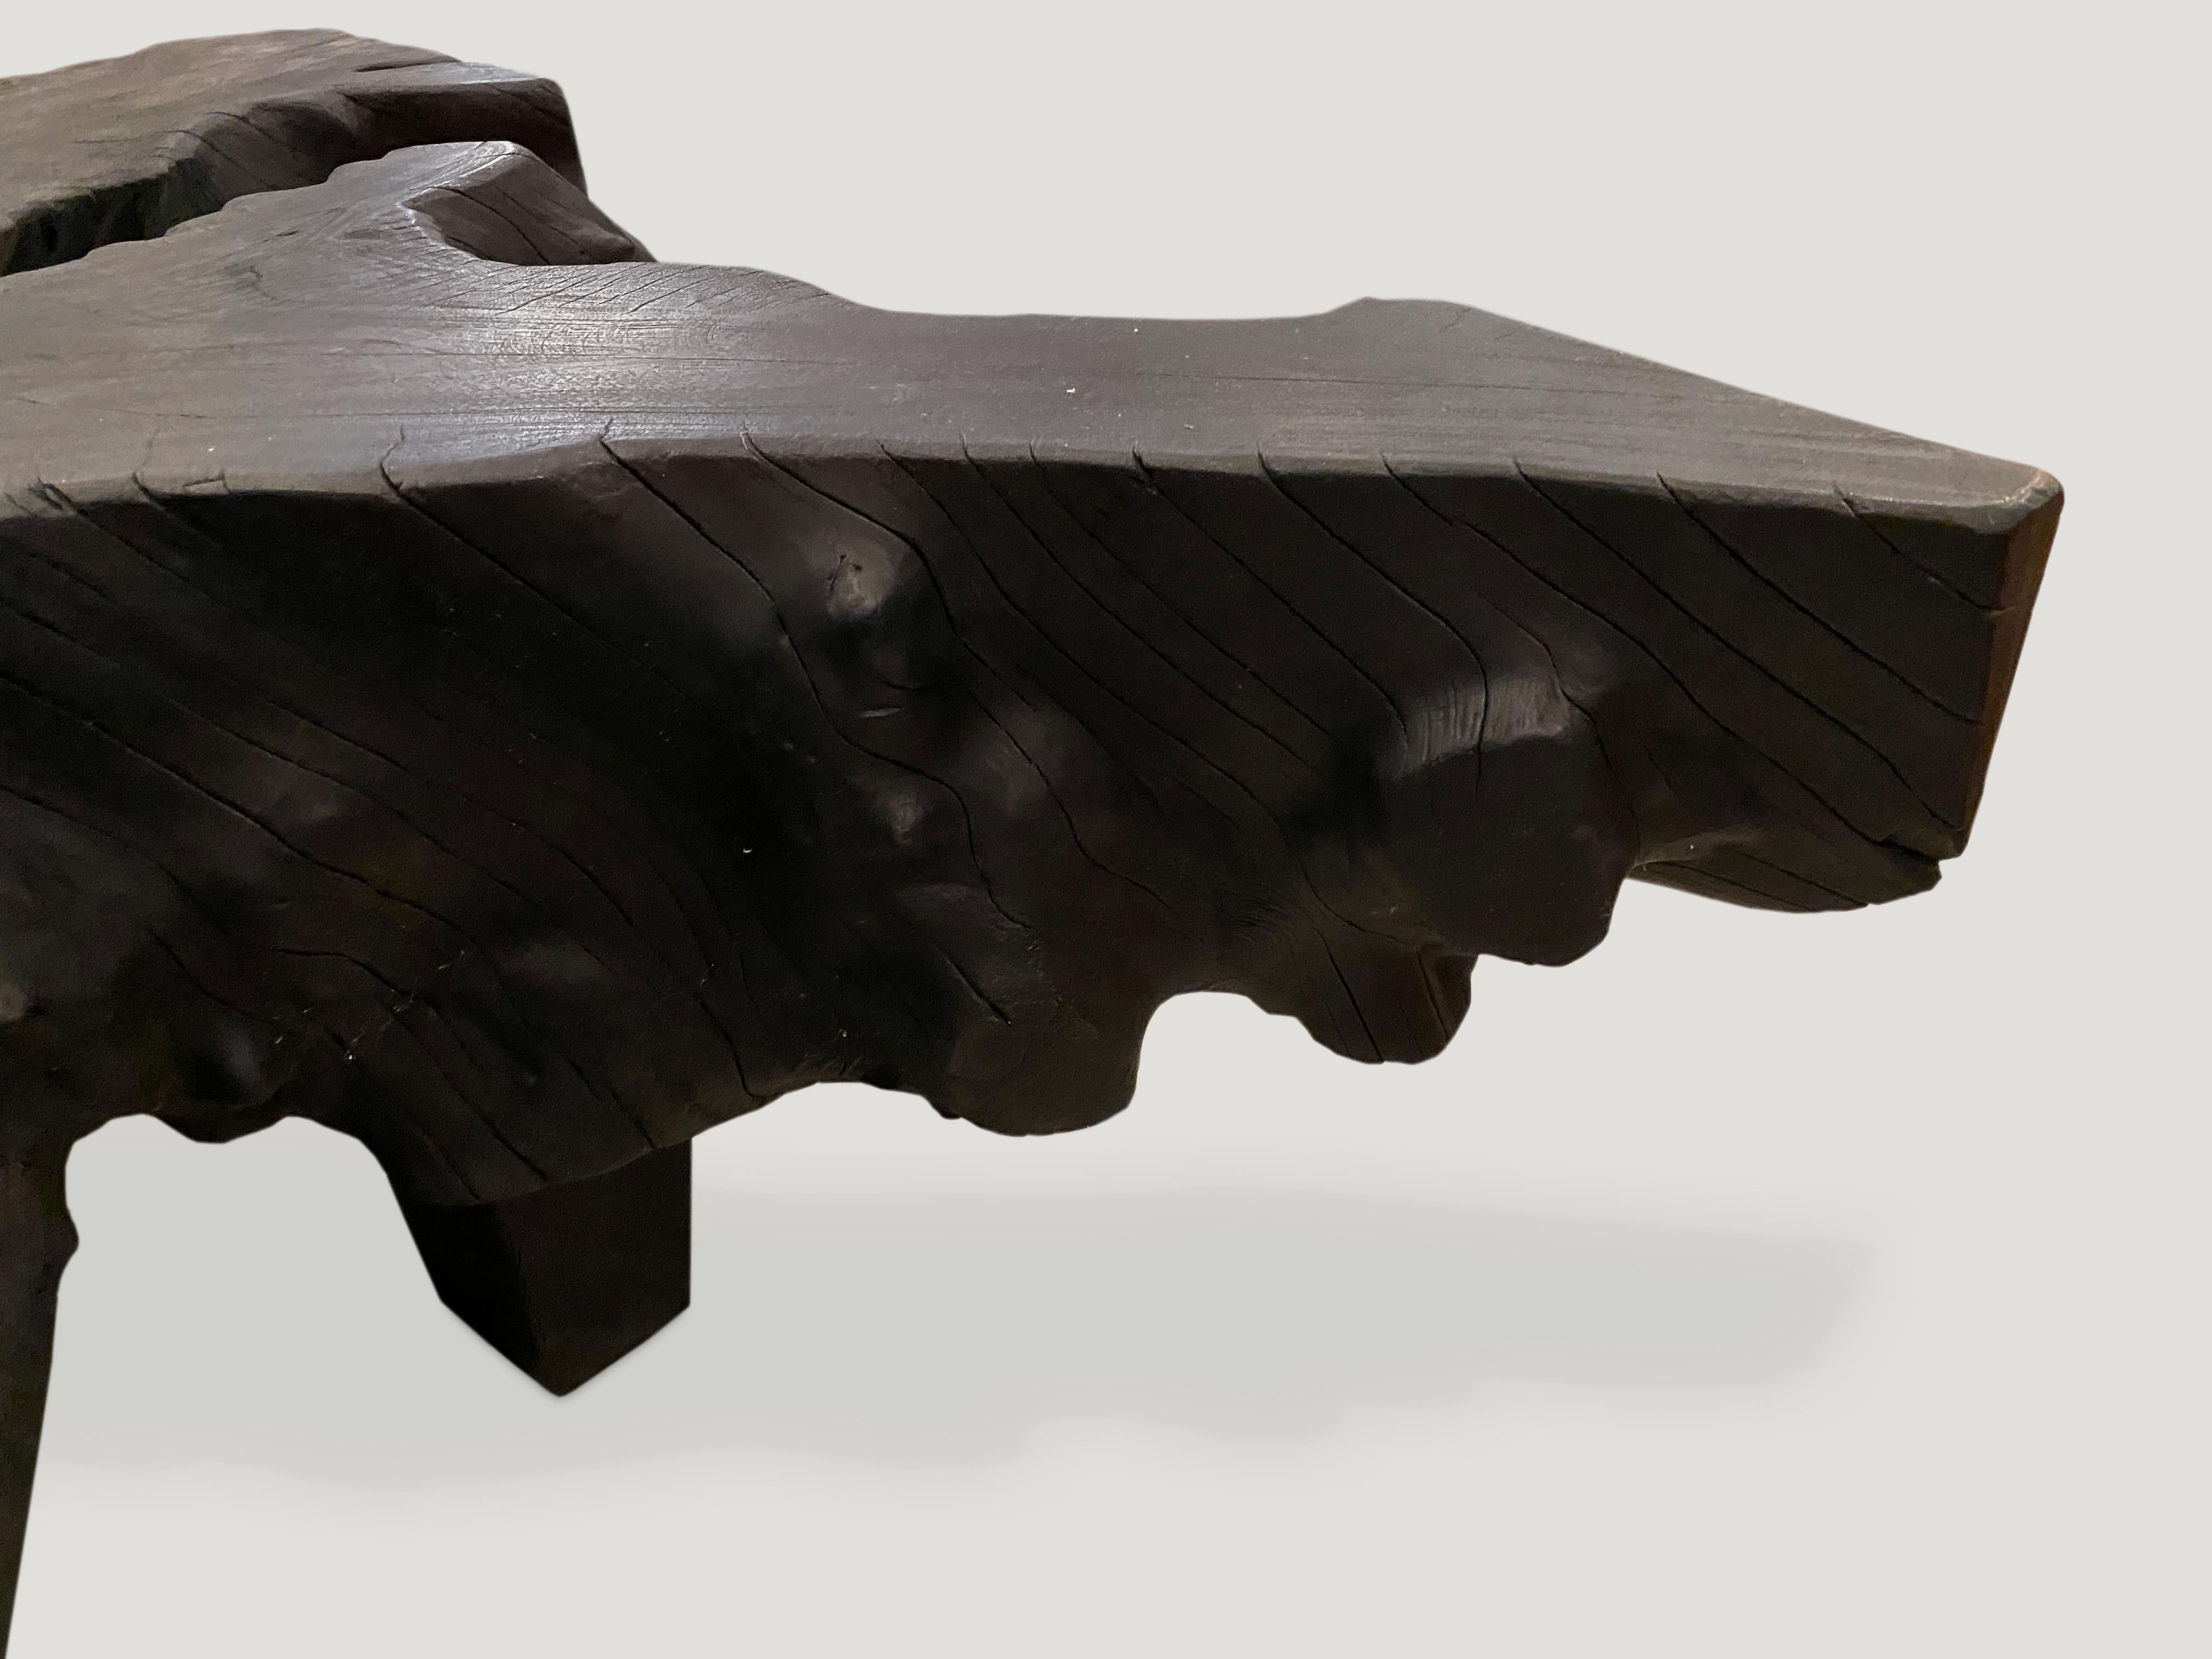 Impressive single reclaimed root mahogany coffee table. The top is 9” thick and floats off the floor on 7” high Minimalist block legs. Burnt, sanded and sealed exposing the beautiful grain of the wood.

The Triple Burnt collection represents a